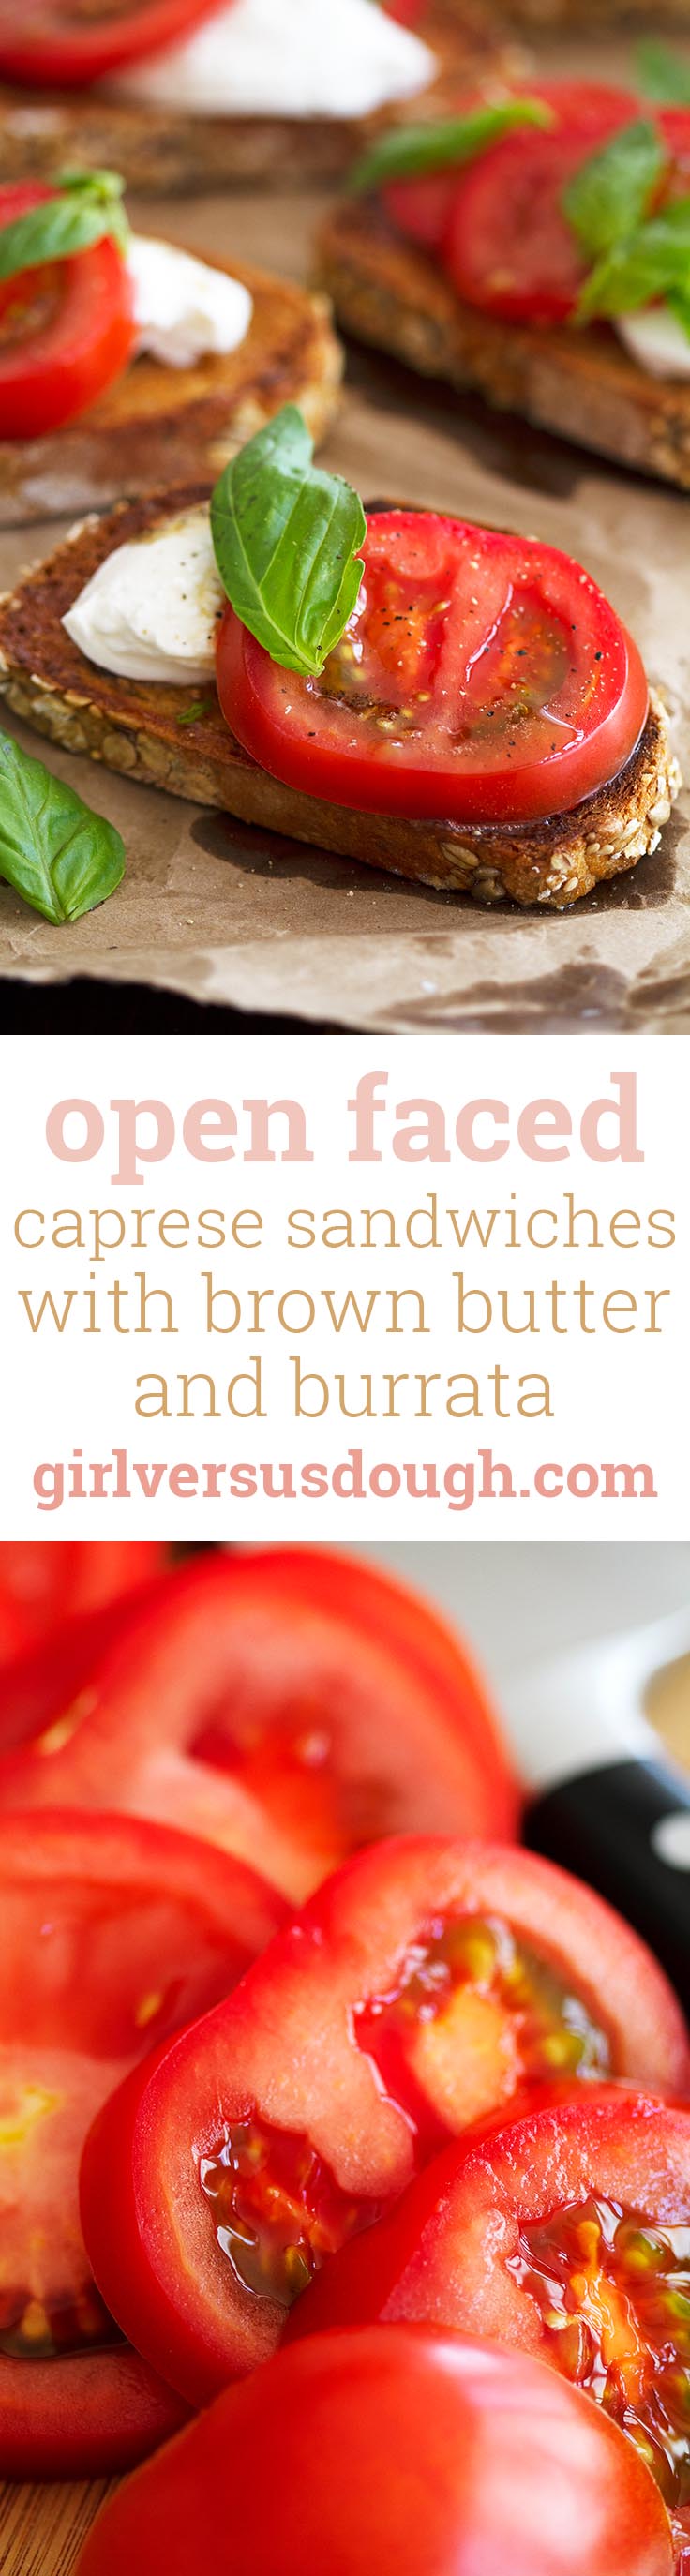 Open Faced Caprese Sandwiches with Brown Butter and Burrata -- an easy and delicious appetizer or light meal, perfect for entertaining! girlversusdough.com @girlversusdough